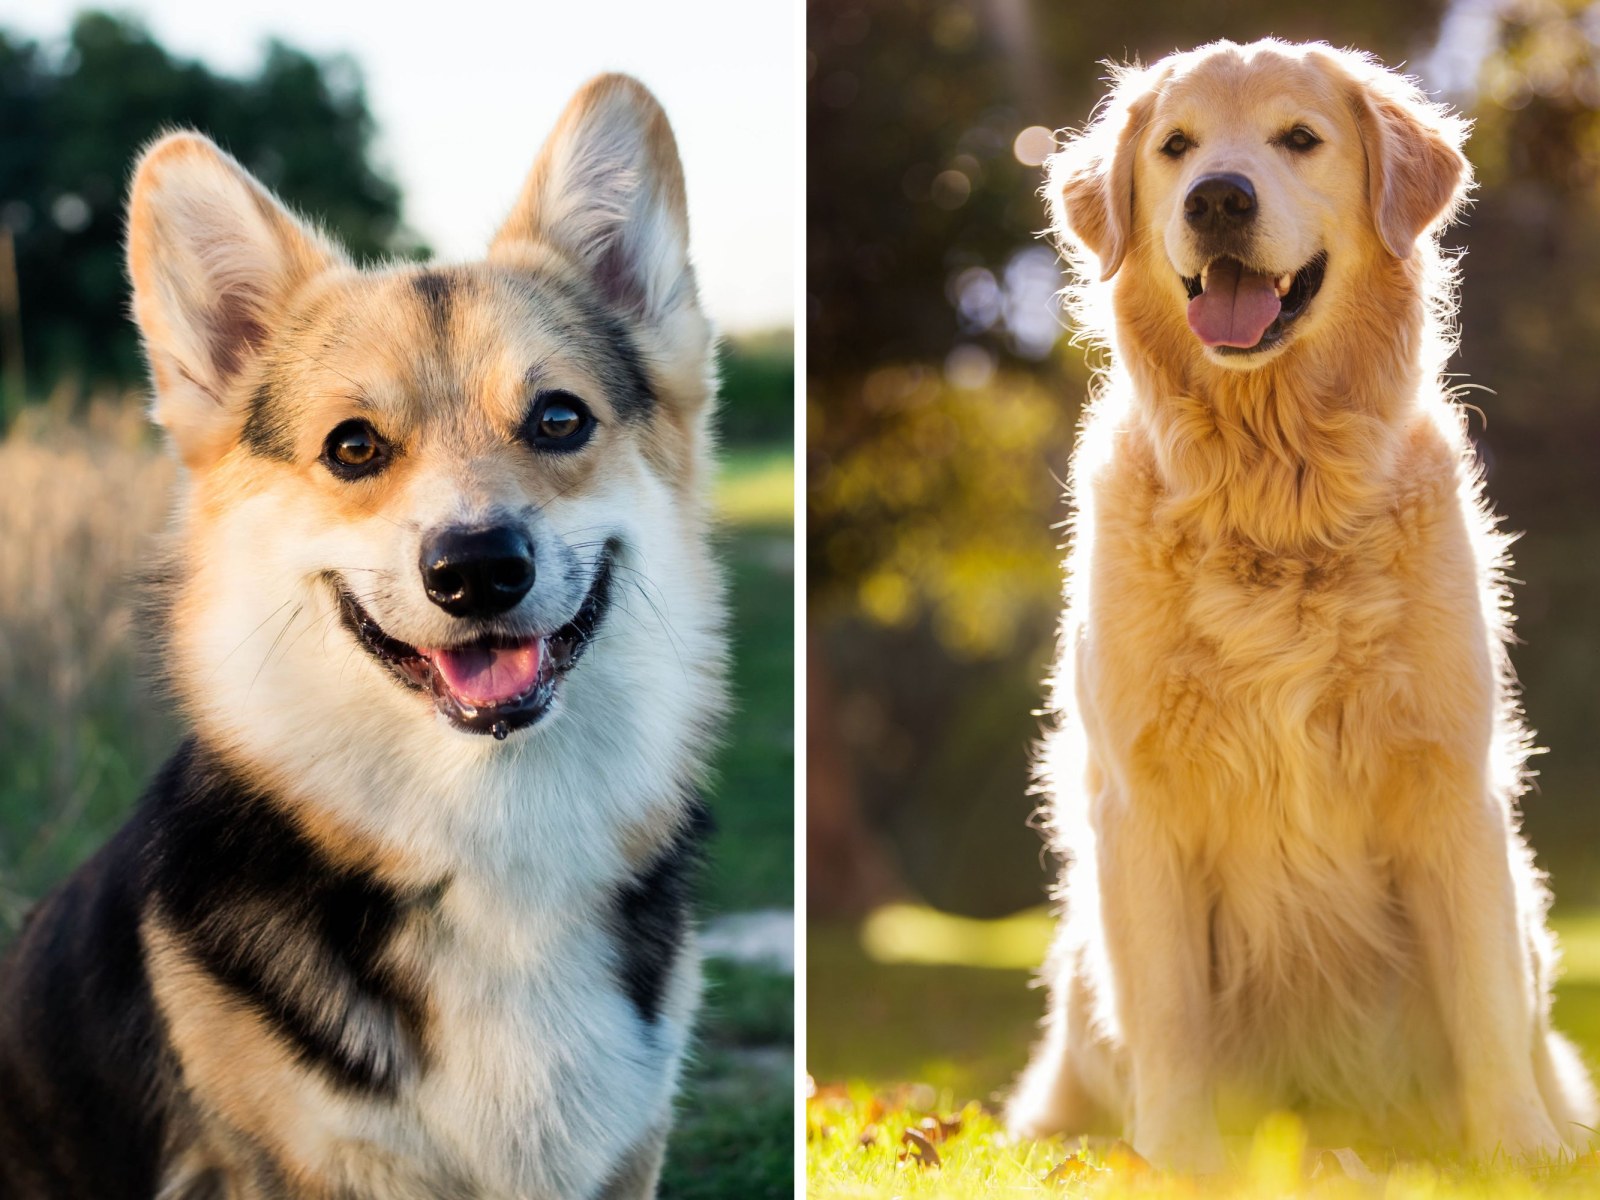 Internet Obsessed With Corgi x Golden Retriever Mix: 'Best of Both